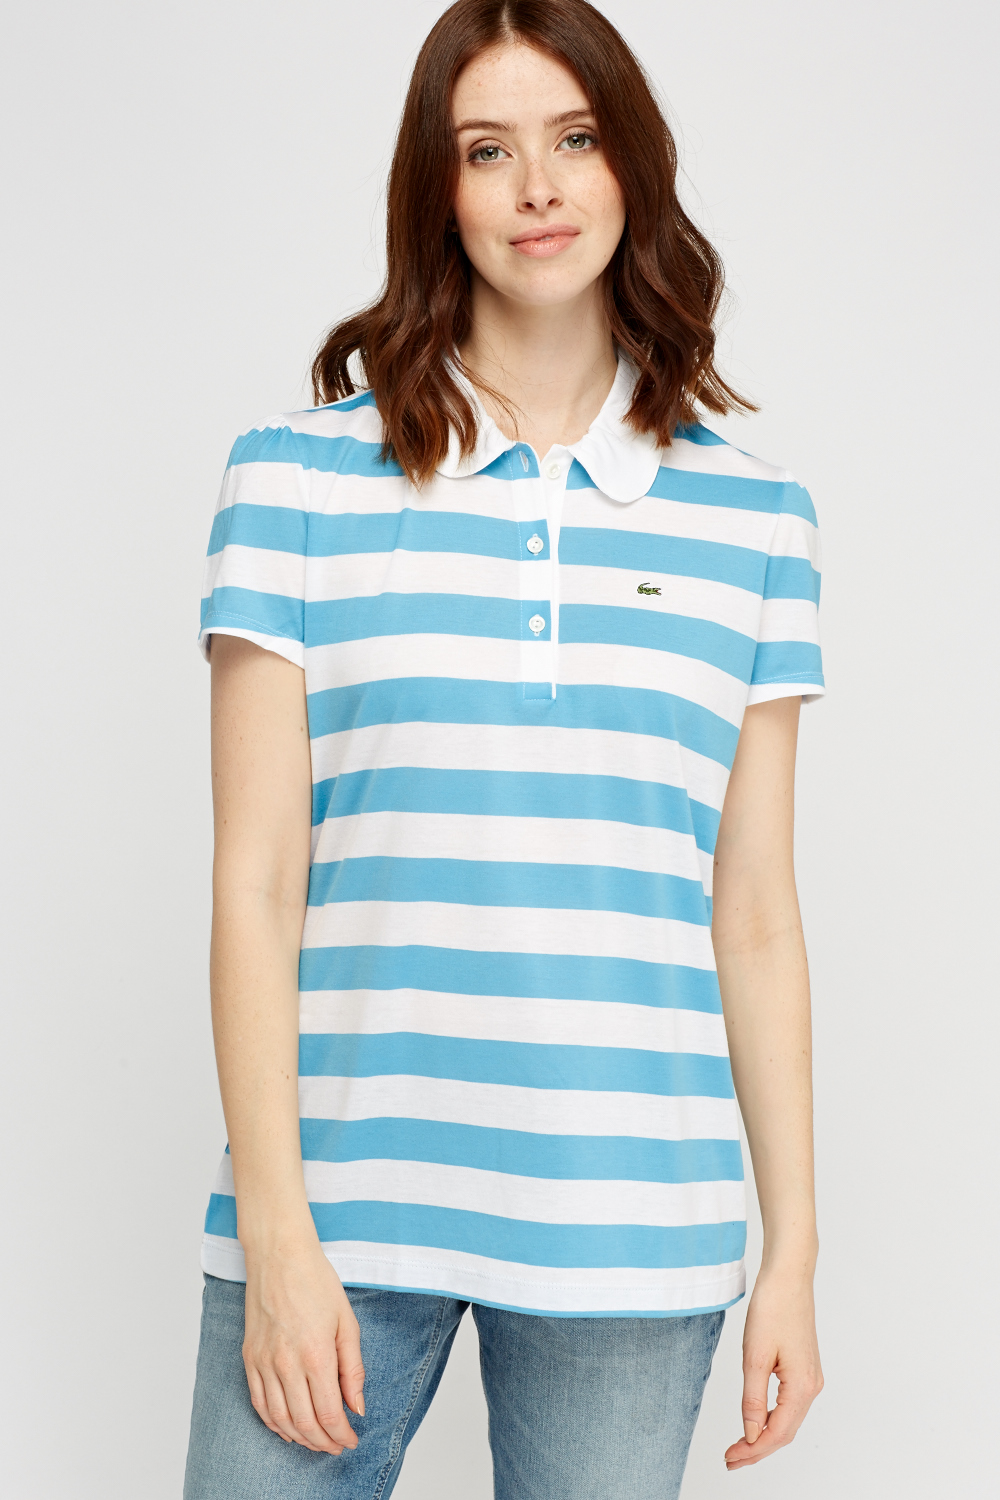 Lacoste Striped Thin Polo T-Shirt - Limited edition | Discount Designer ...